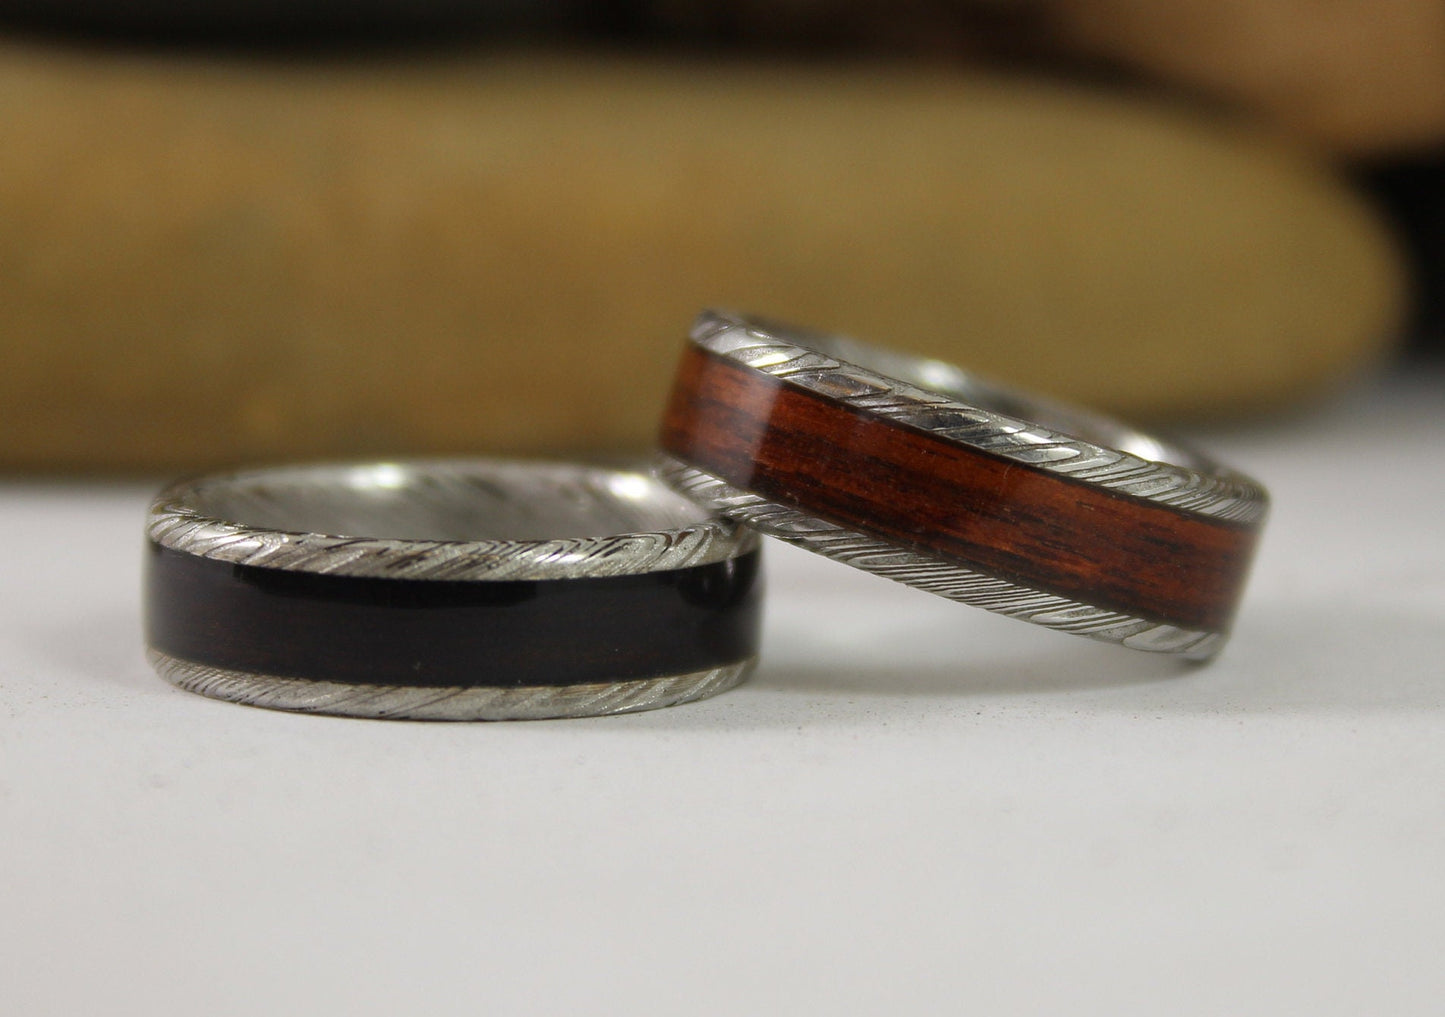 Damascus Steel Ring With Kingwood Inlay